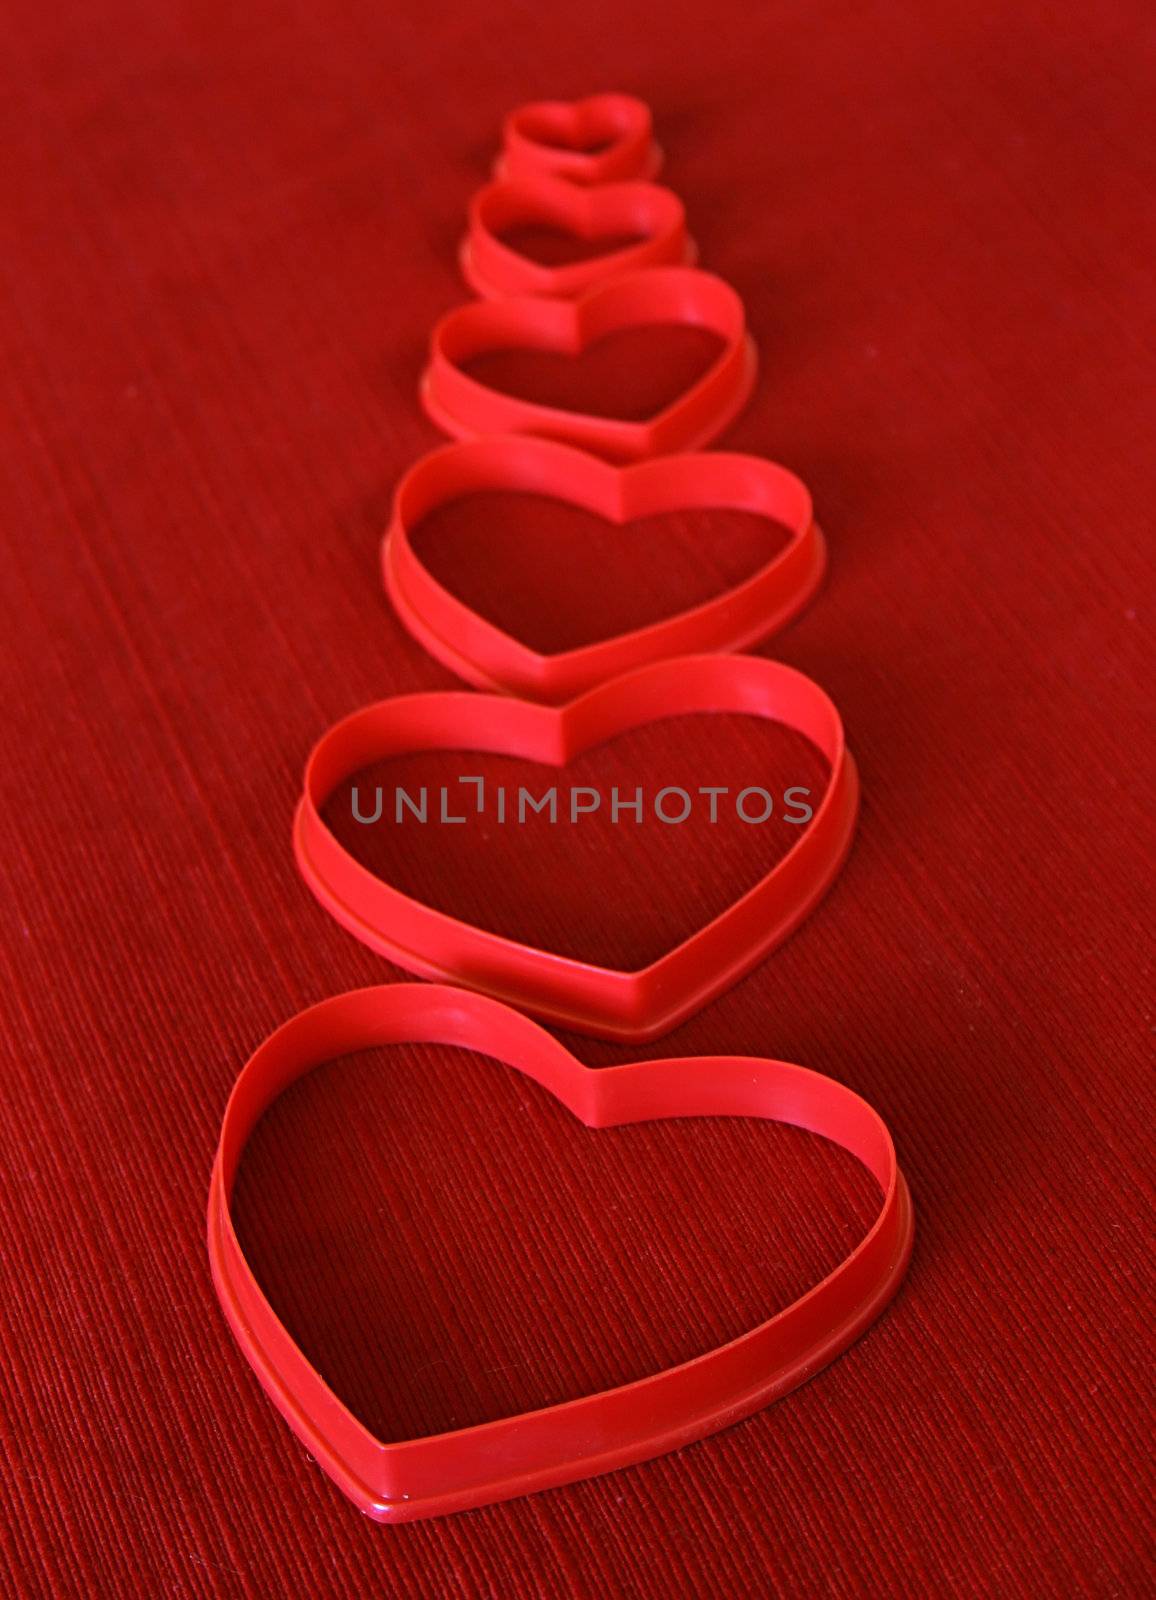 A Row of Hearts by thephotoguy